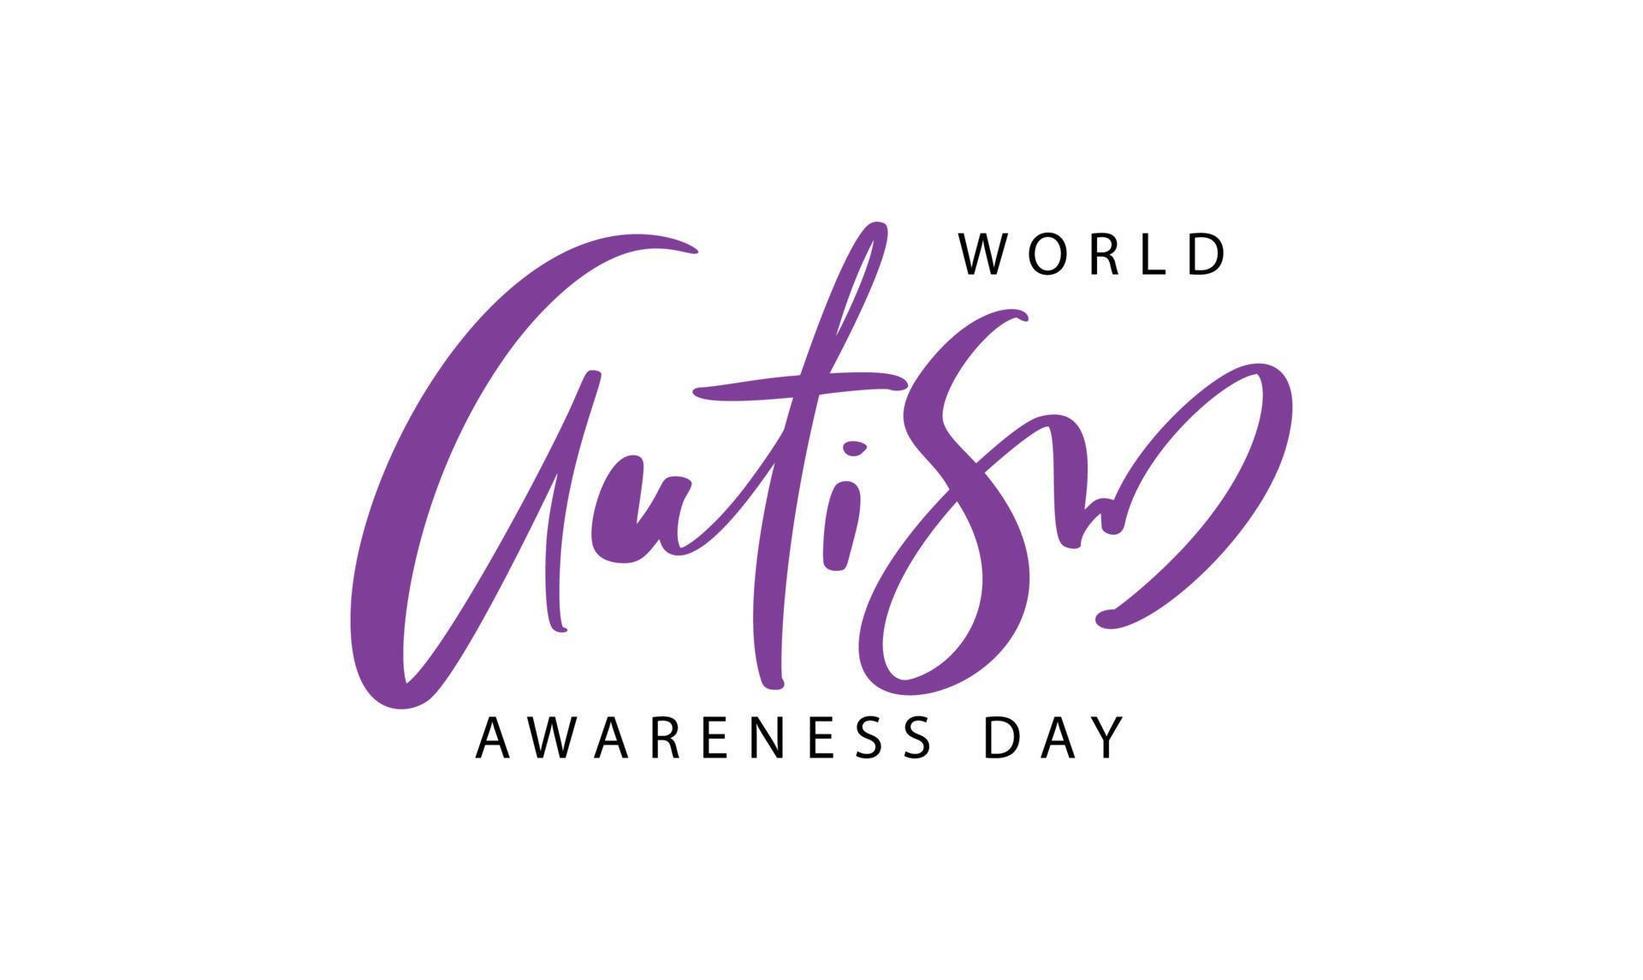 World Autism awareness day vector calligraphic logo text hand draw calligraphy lettering. For banner, poster flyer, greeting card for social media